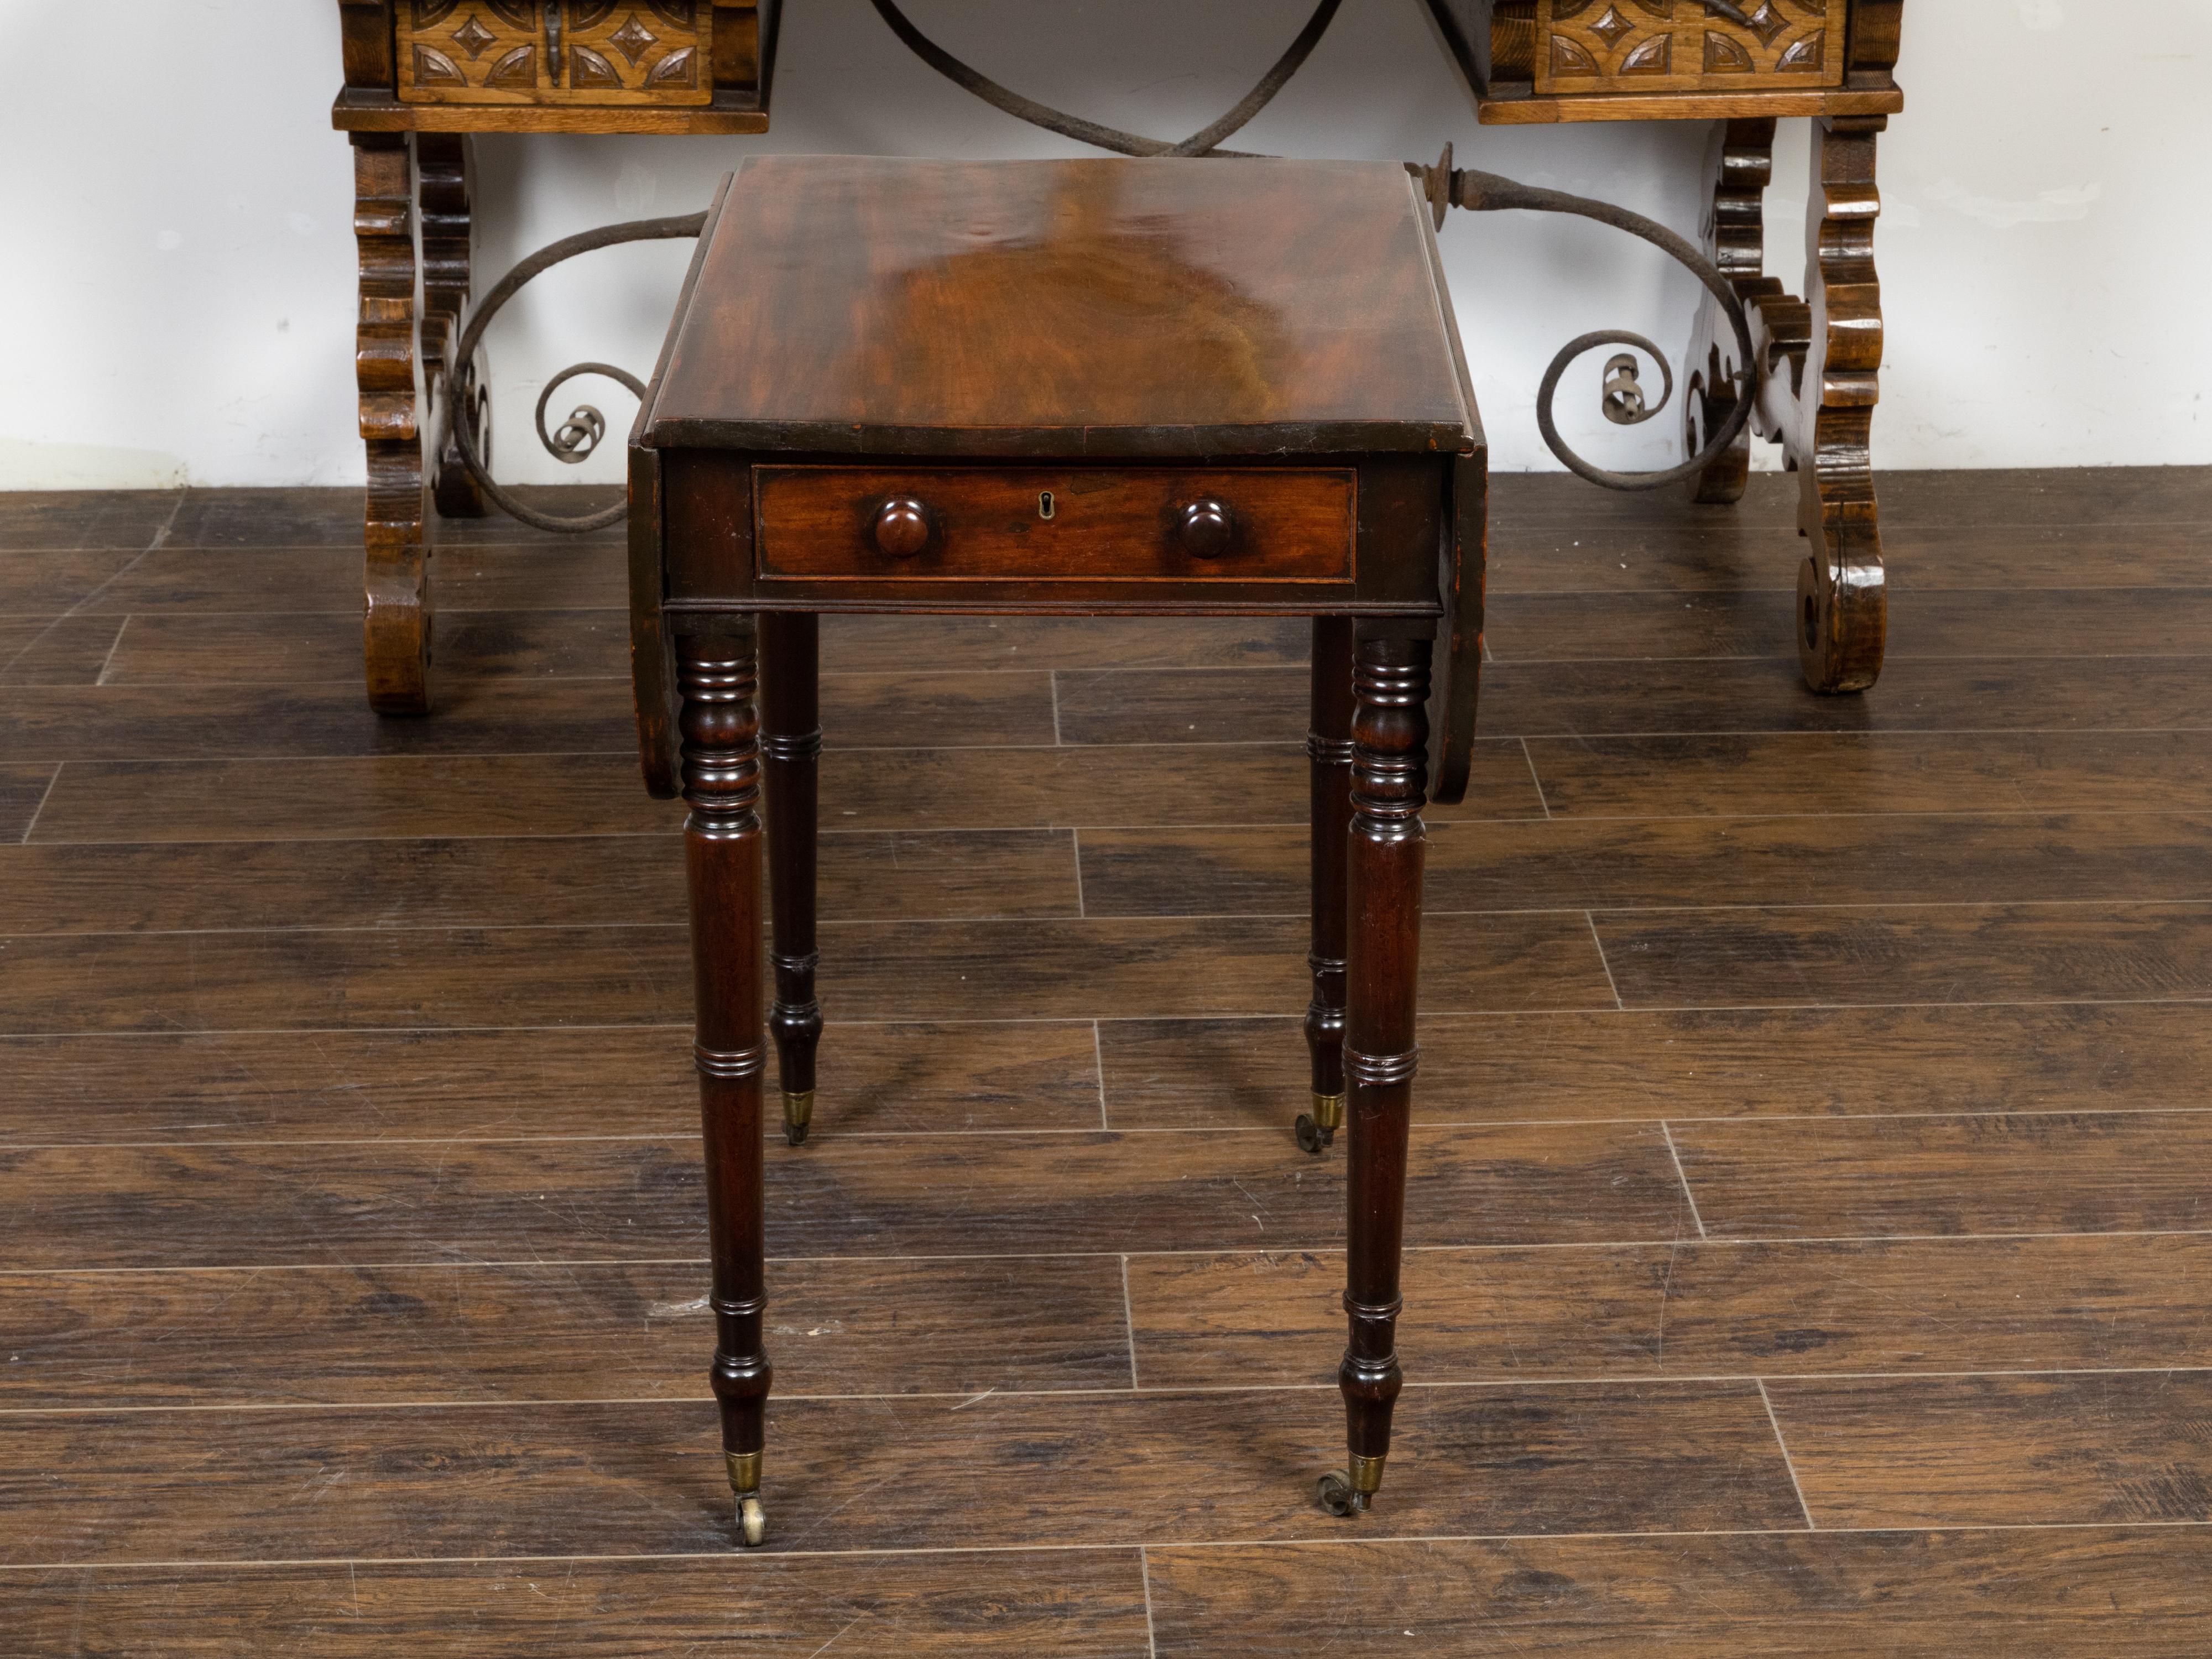 An English Regency period mahogany Pembroke table from the early 19th century, with two drop leaves, drawer, turned legs and brass casters. Created in England during the Regency period in the first quarter of the 19th century, this mahogany